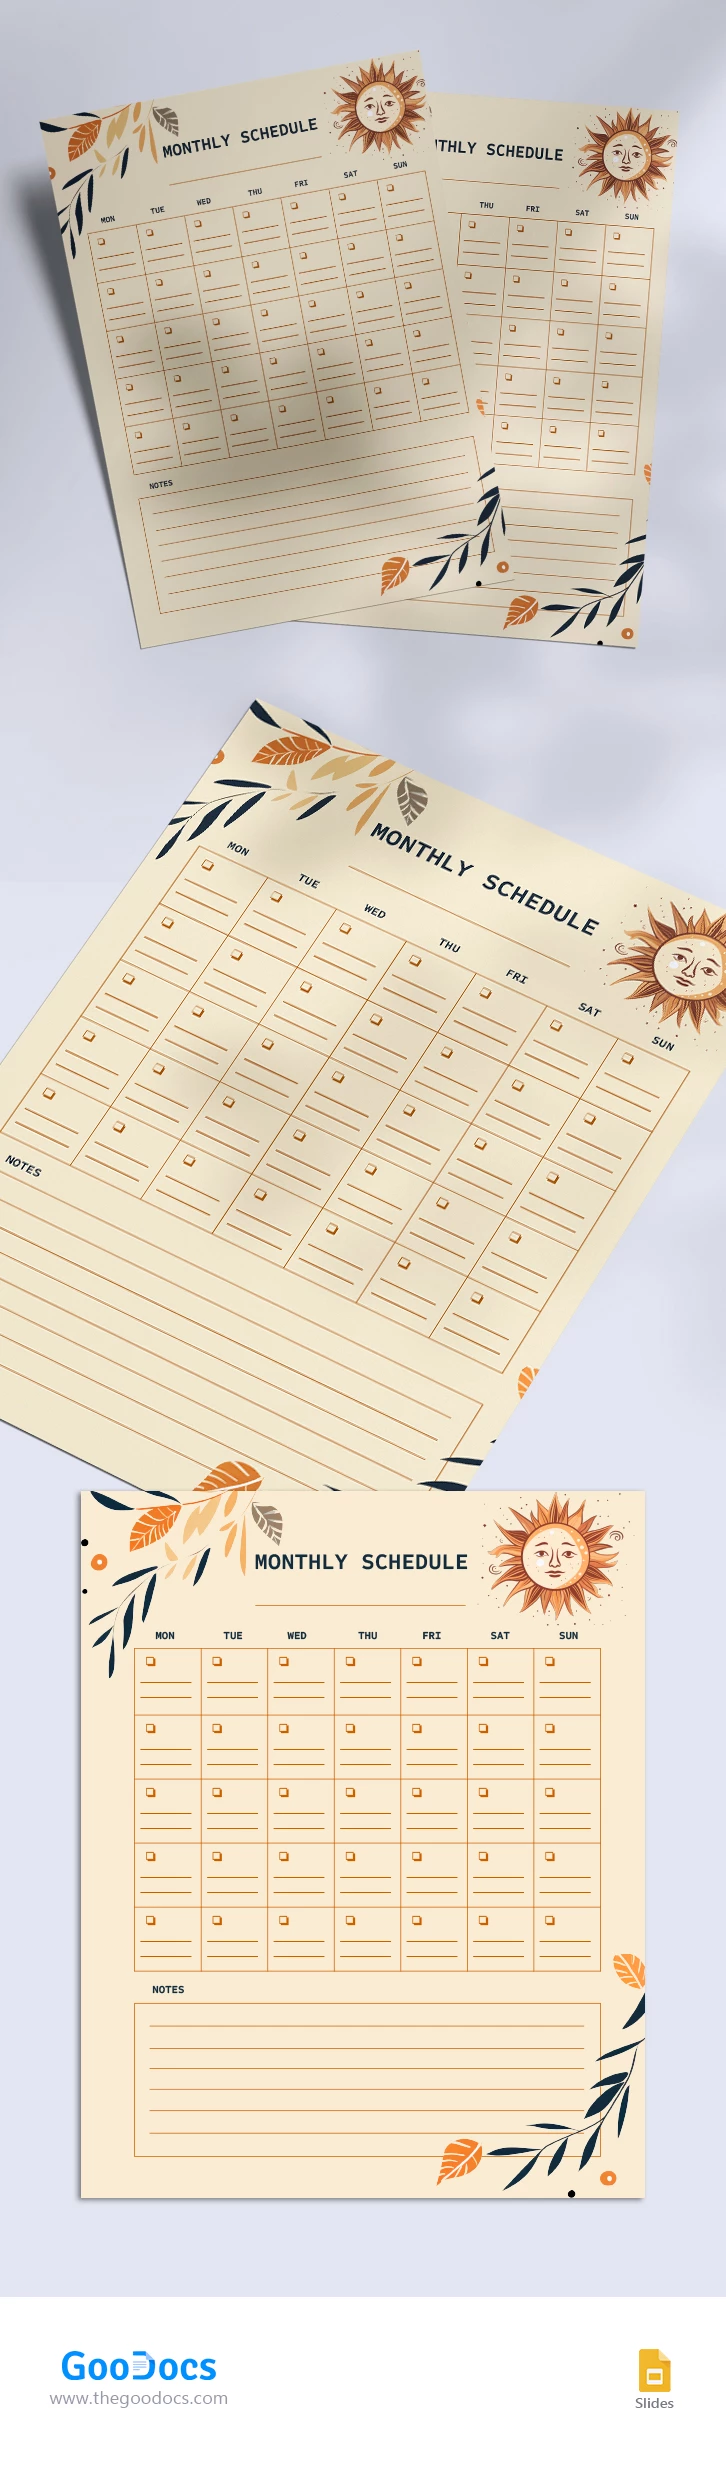 Monthly Schedule - free Google Docs Template - 10067683